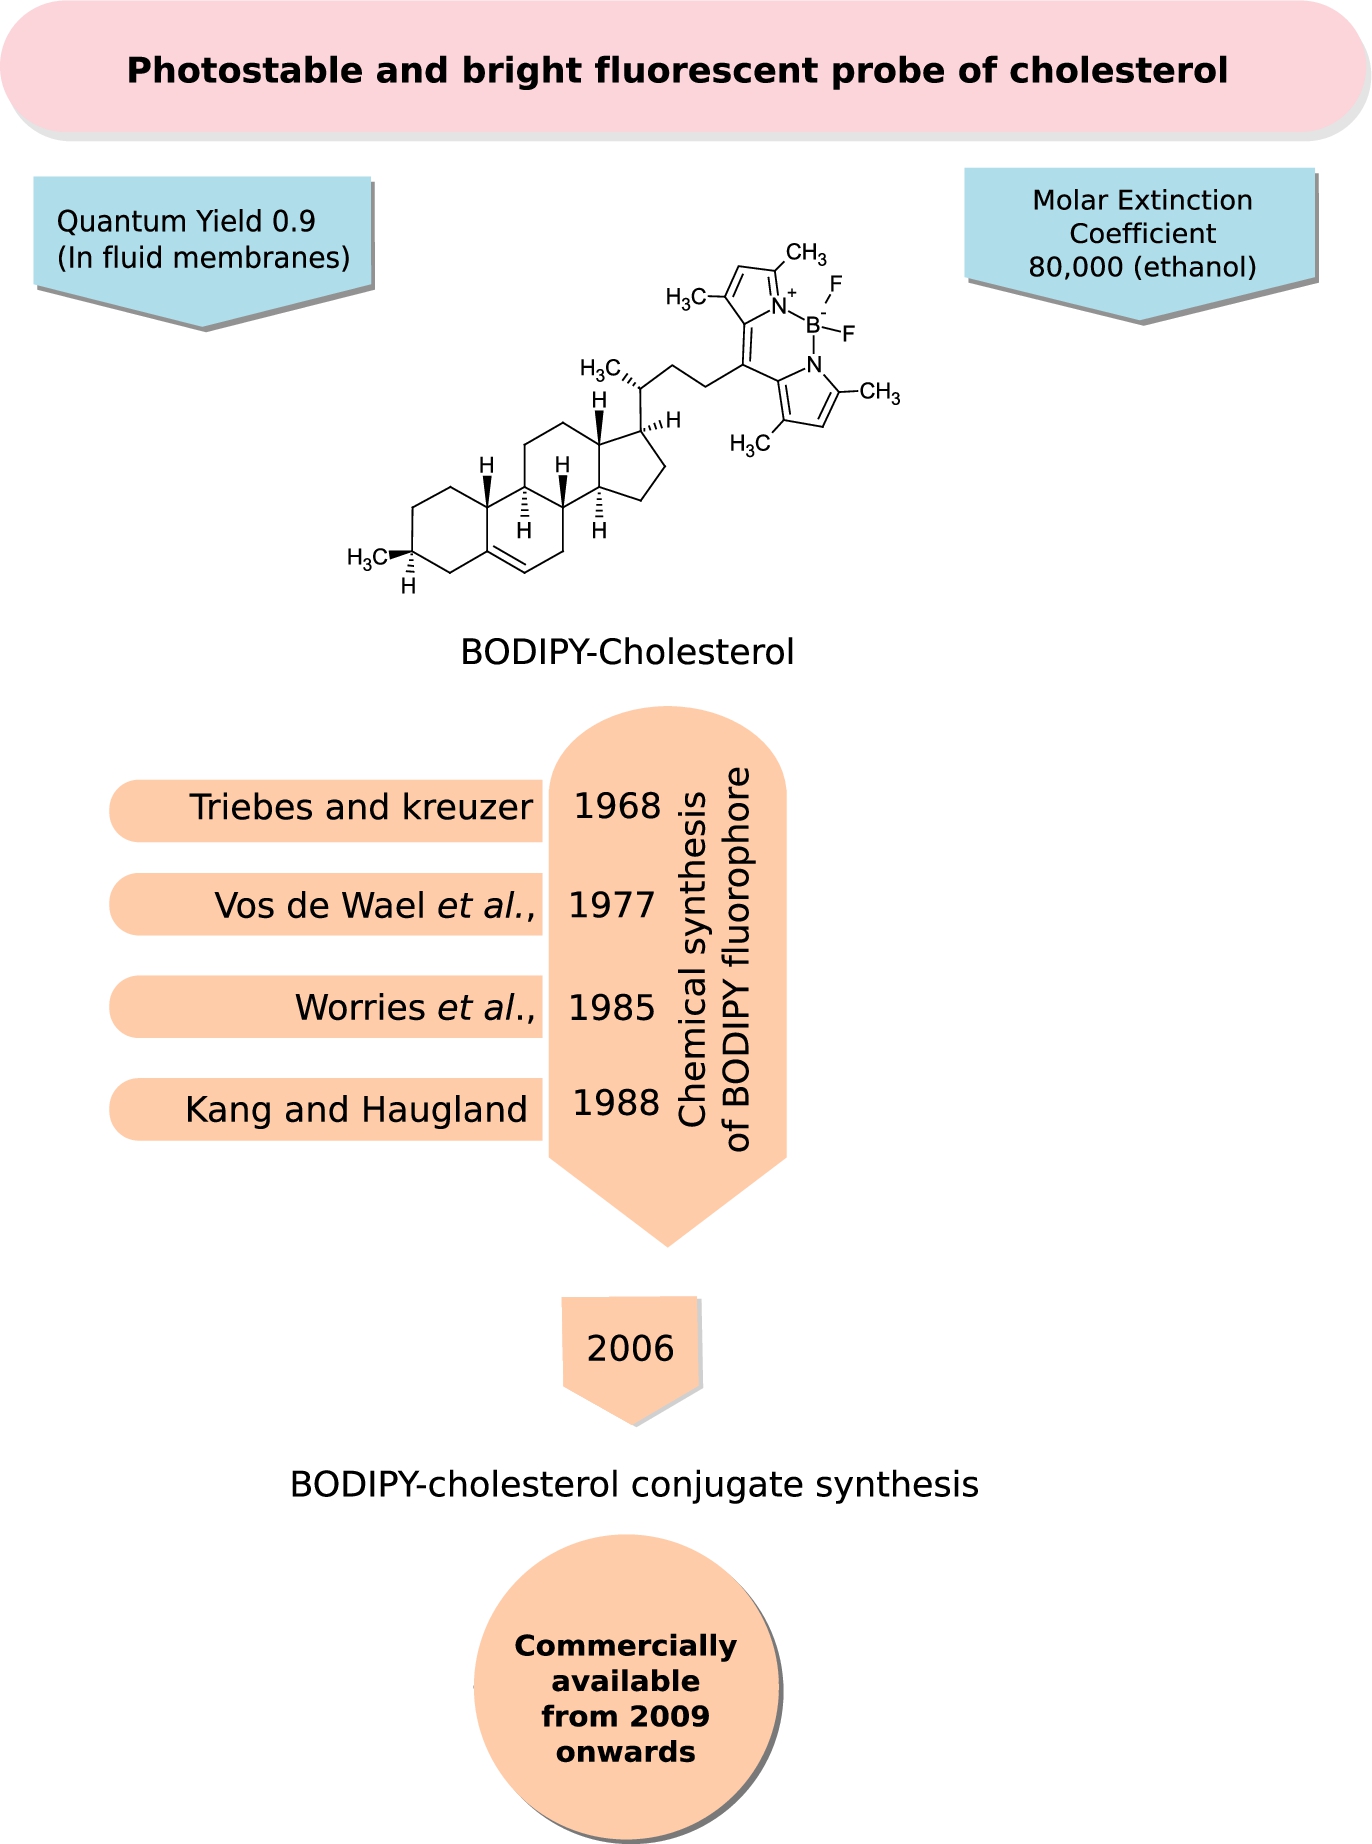 BODIPY-Cholesterol, a bright and photostable fluorescent probe of cholesterol. BODIPY falls under the class of boron-containing diazaindacene fluorophores, which are bright and photostable probes with very low environmental sensitivity (relative to NBD and Dansyl probes) used in membrane research. The figure shows the chemical structure of the most promising and functional variant of BODIPY-cholesterol (see Section 2.2.2 for details). A chronological timeline of the chemical synthesis of the fluorescent probe, BODIPY and its attachment to cholesterol is given. BODIPY-cholesterol became commercially available from Avanti Polar Lipids under the name “Top-Fluor” cholesterol from 2009 onwards.